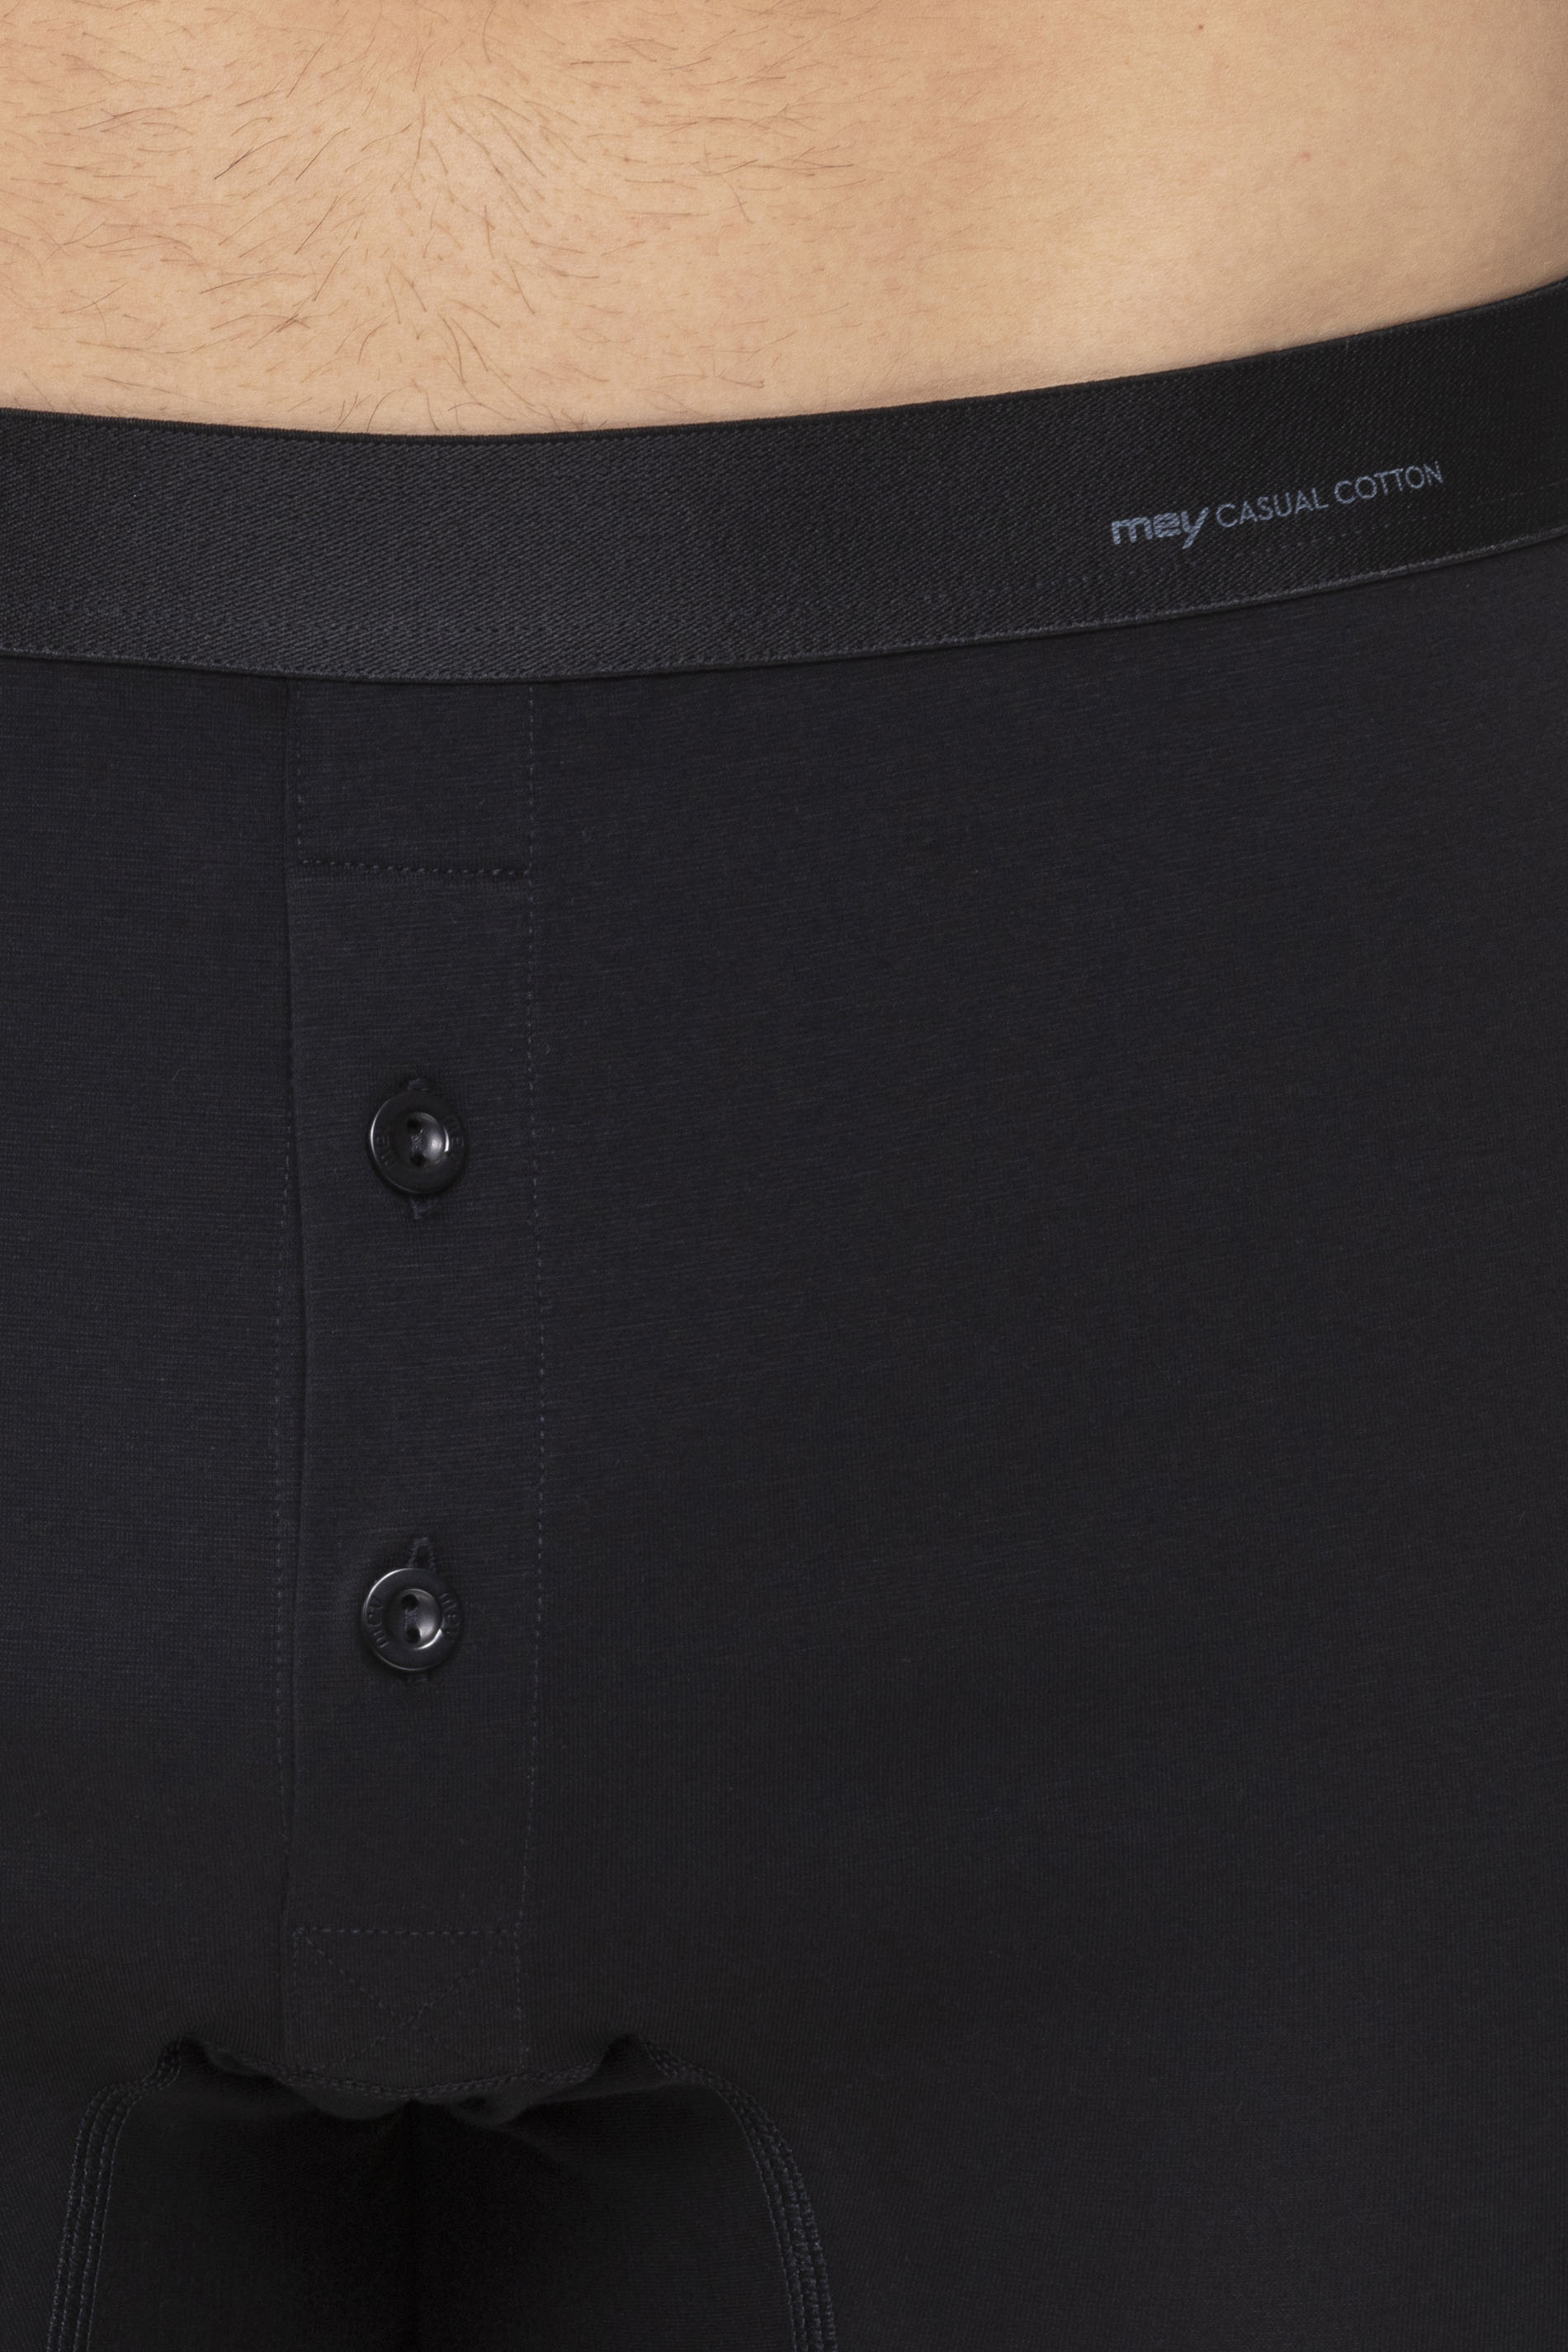 Track shorts Black Serie Casual Cotton Detail View 01 | mey®